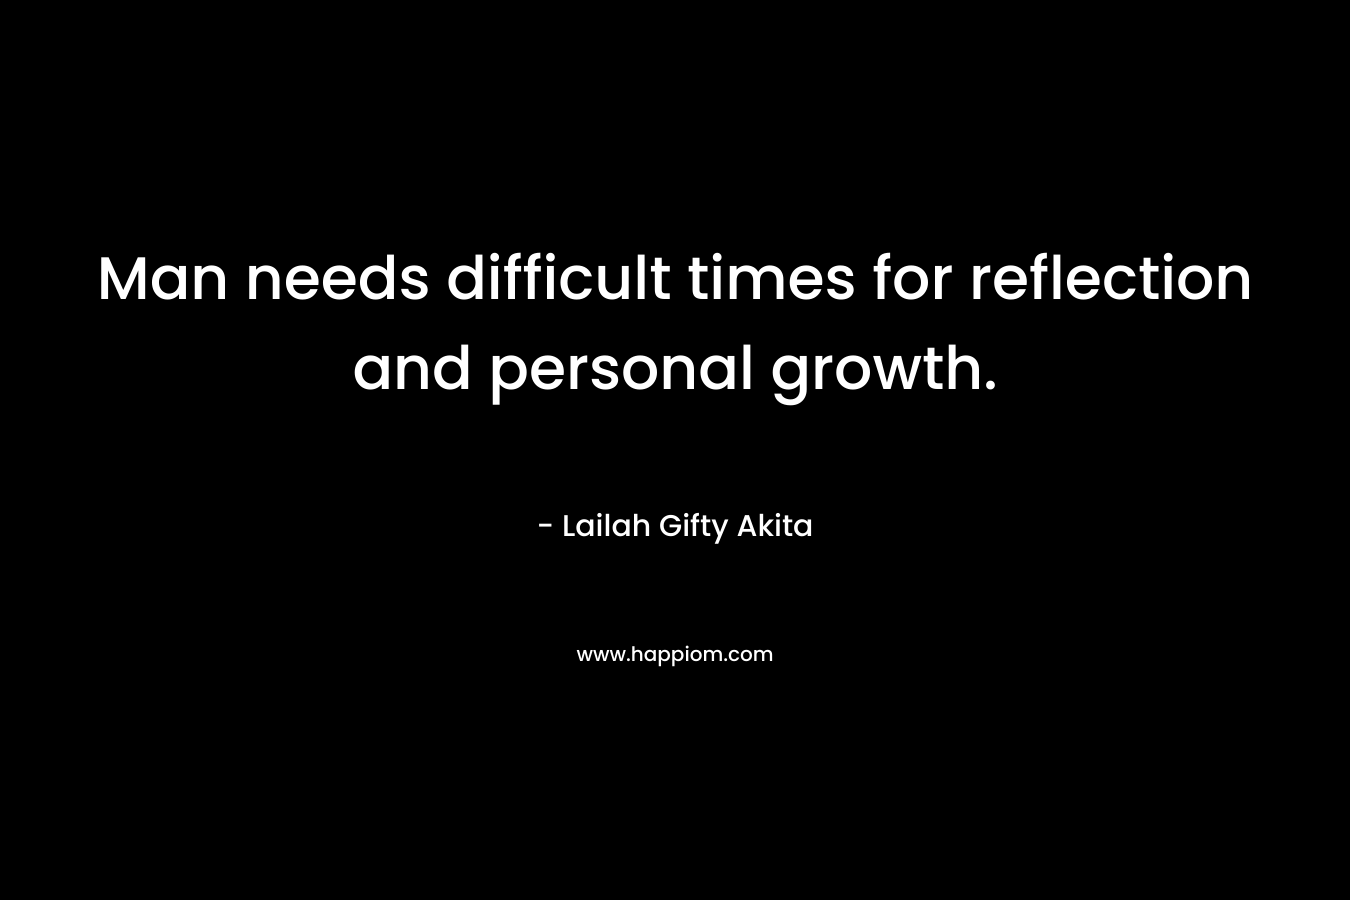 Man needs difficult times for reflection and personal growth.